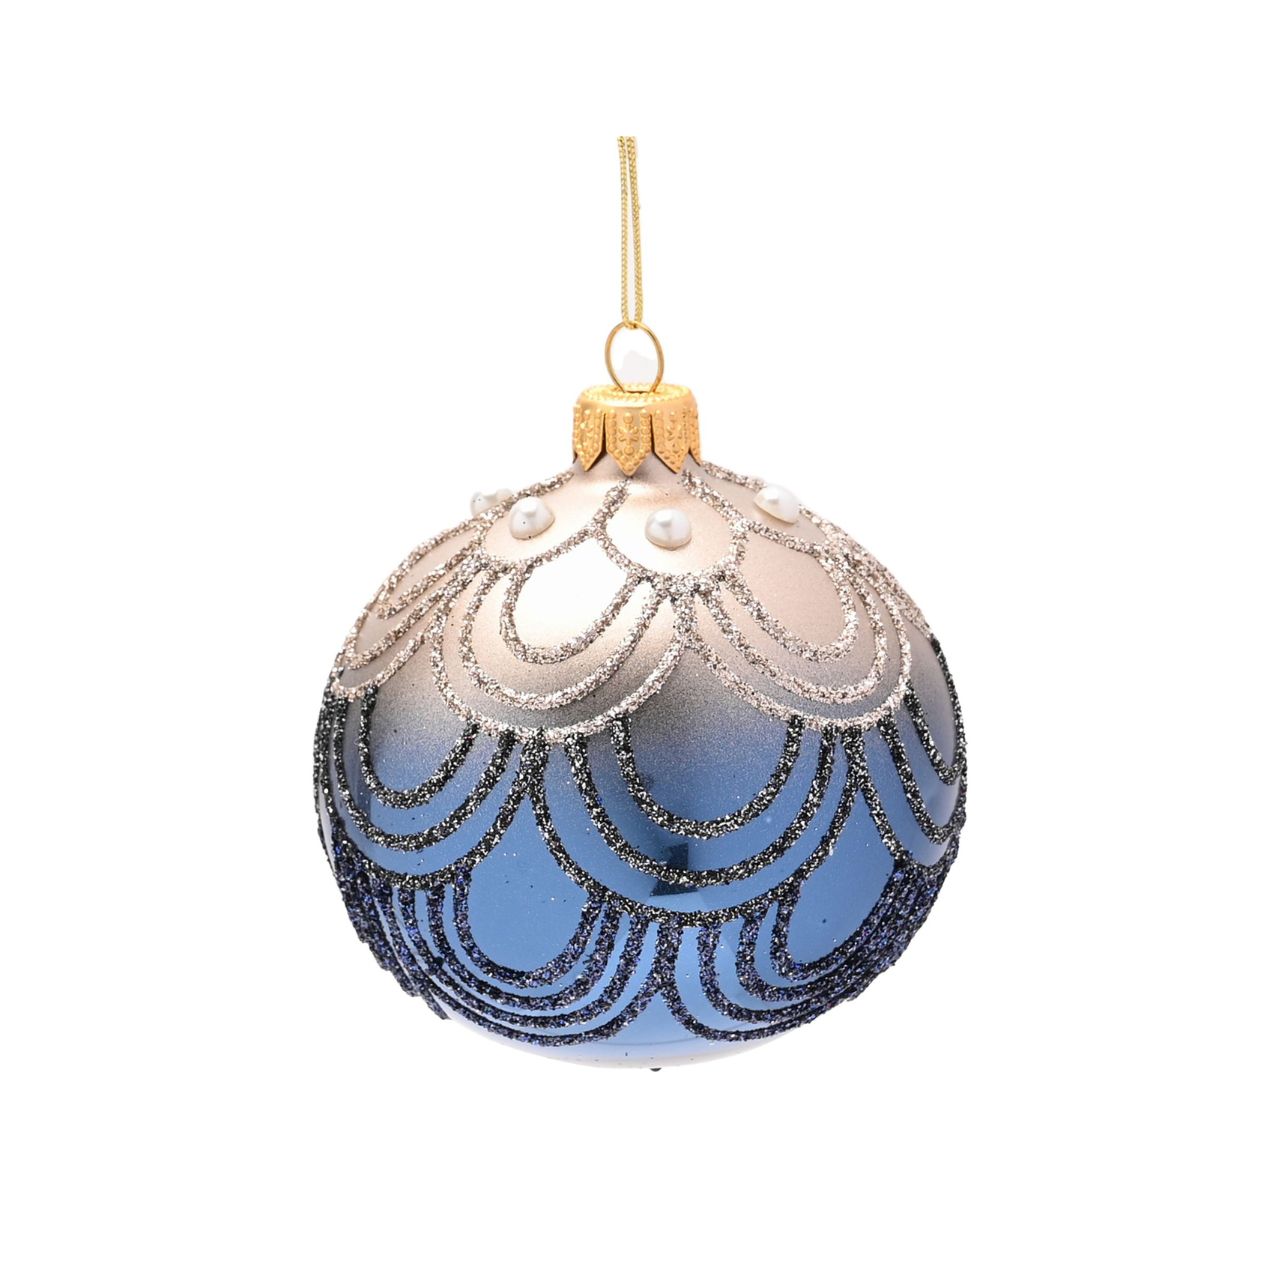 Celestial Blue Circular Hand Decorated Ornamental Bauble  A blue hand decorated ornamental bauble from THE SEASONAL GIFT CO.  This ornate Christmas bauble holds an abundance of elegance and will stand out amongst the tree branches this festive season.